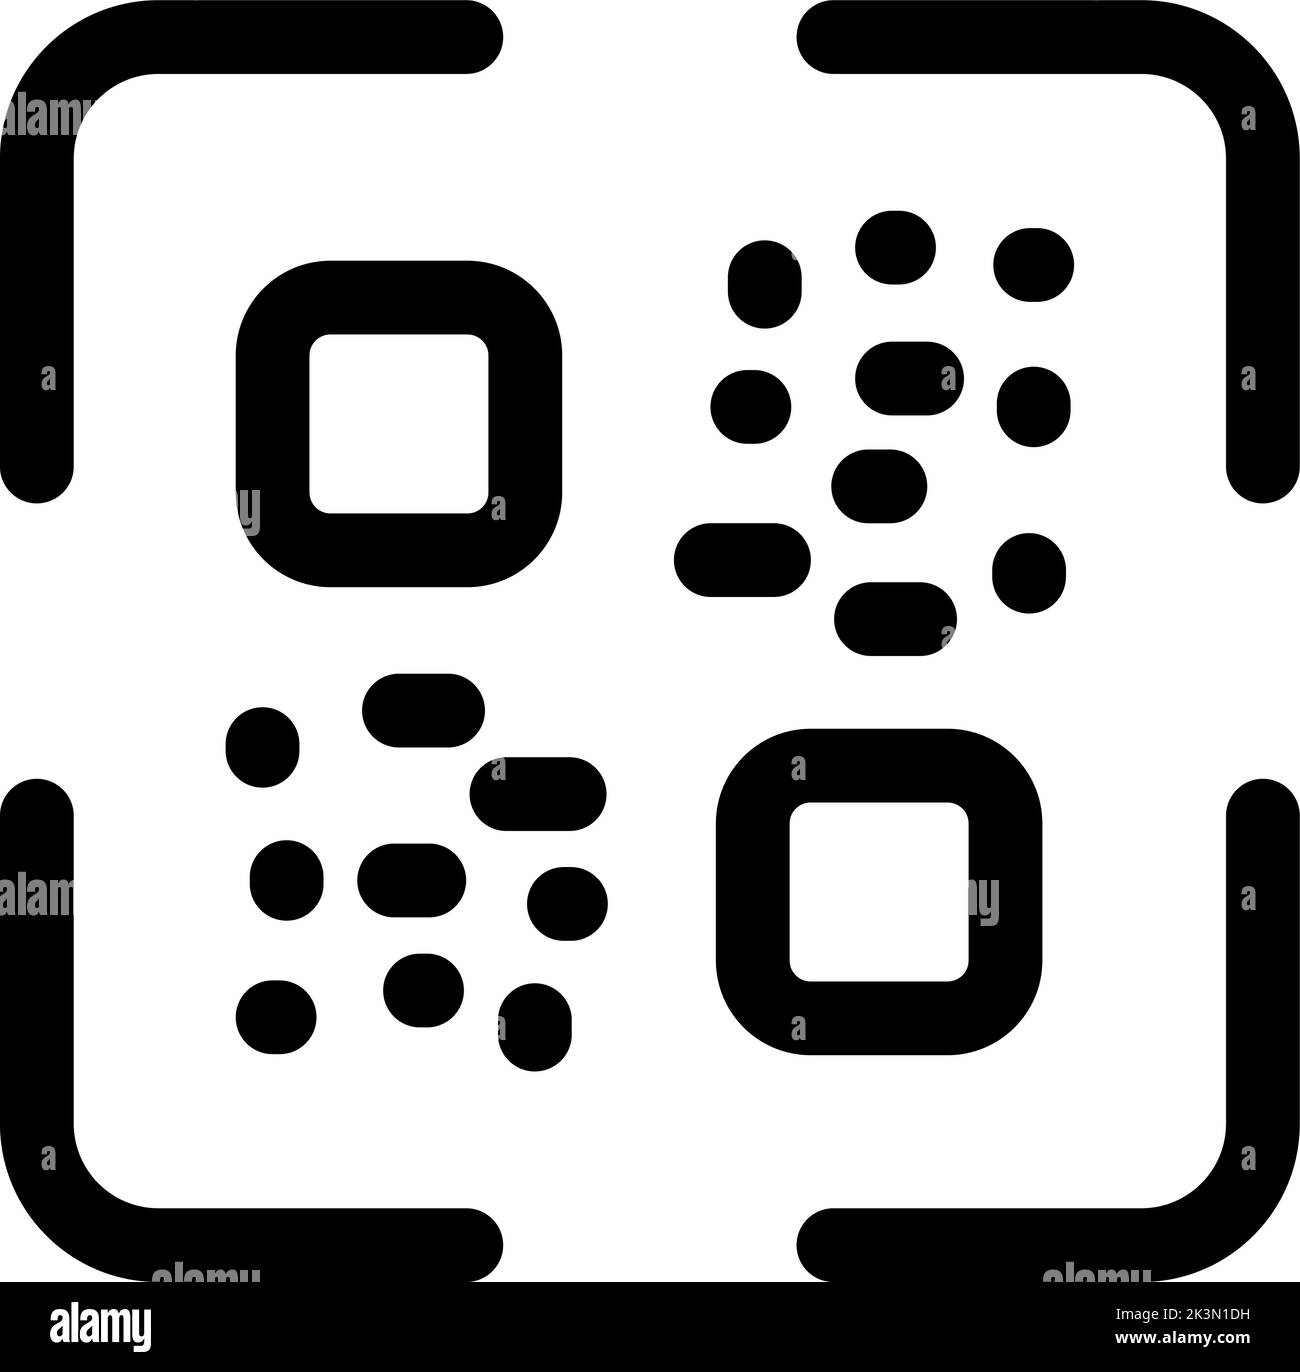 QR Code Vector Icon. Special Identity Illustration As Simple Sign and Trendy Symbol for Design, Websites Presentation or Apps Elements Stock Vector